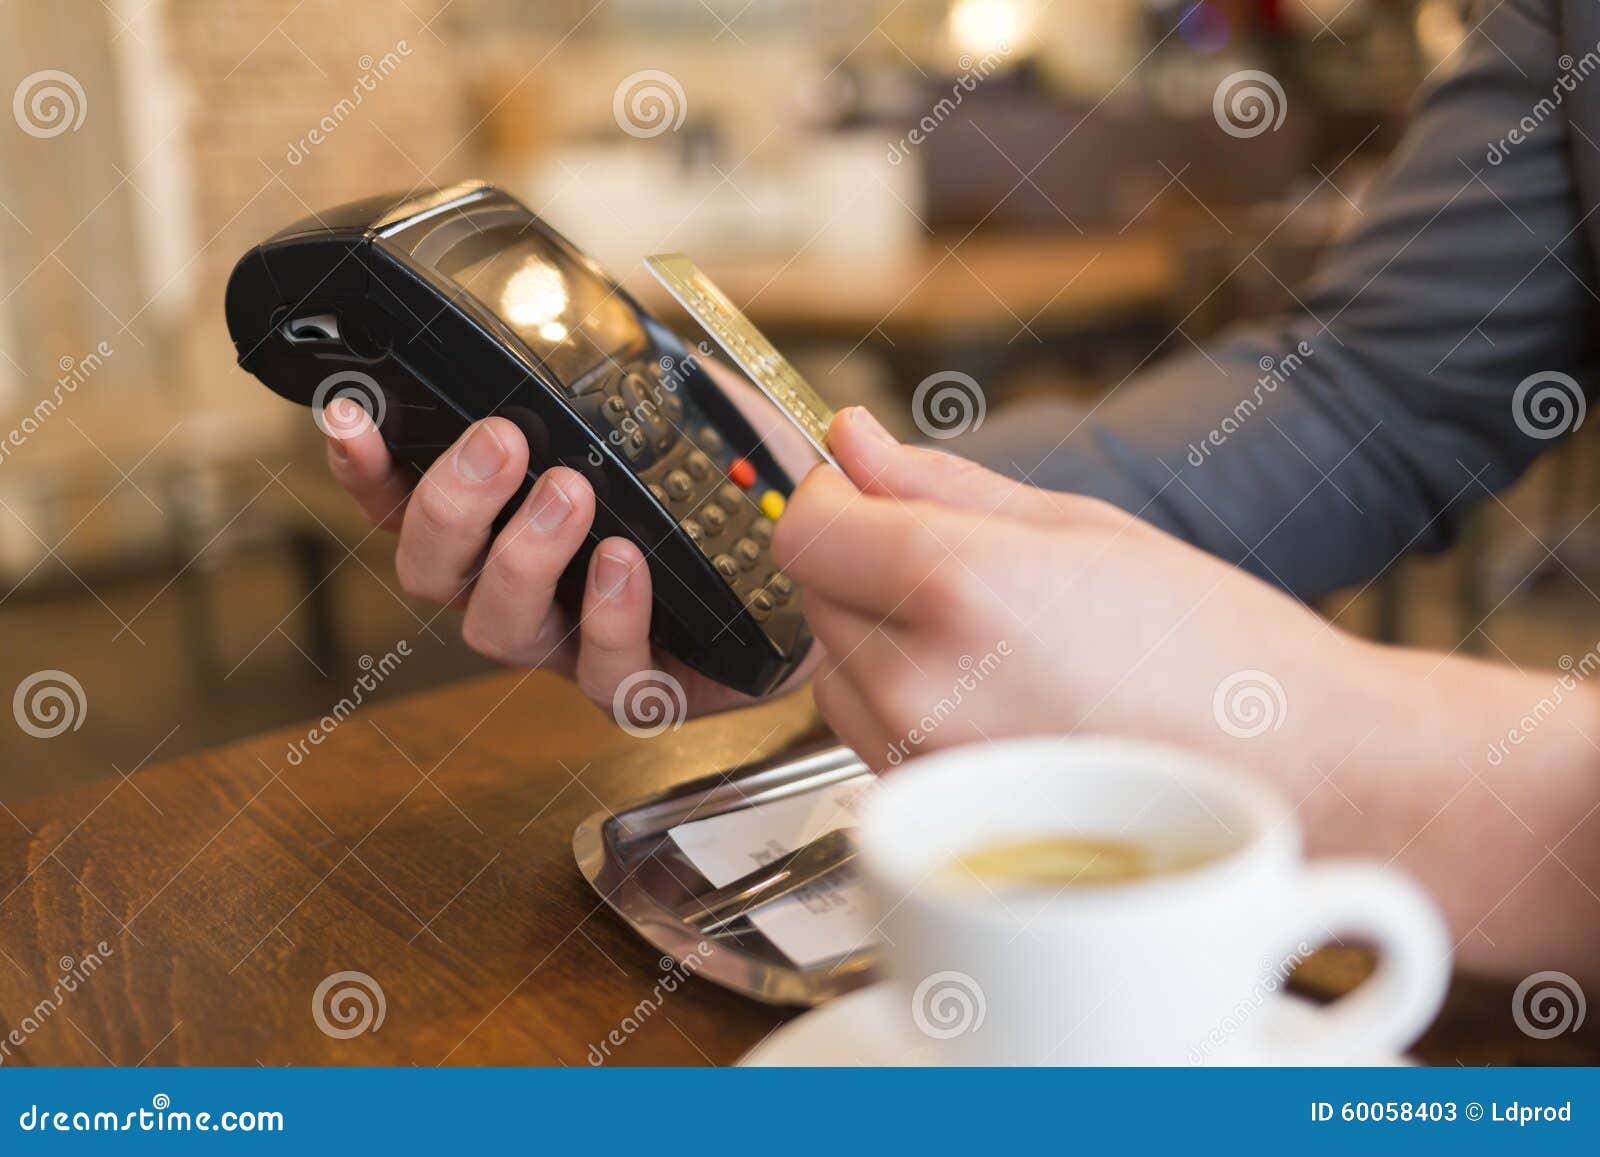 man paying with nfc technology , credit card, in restaurant, bar